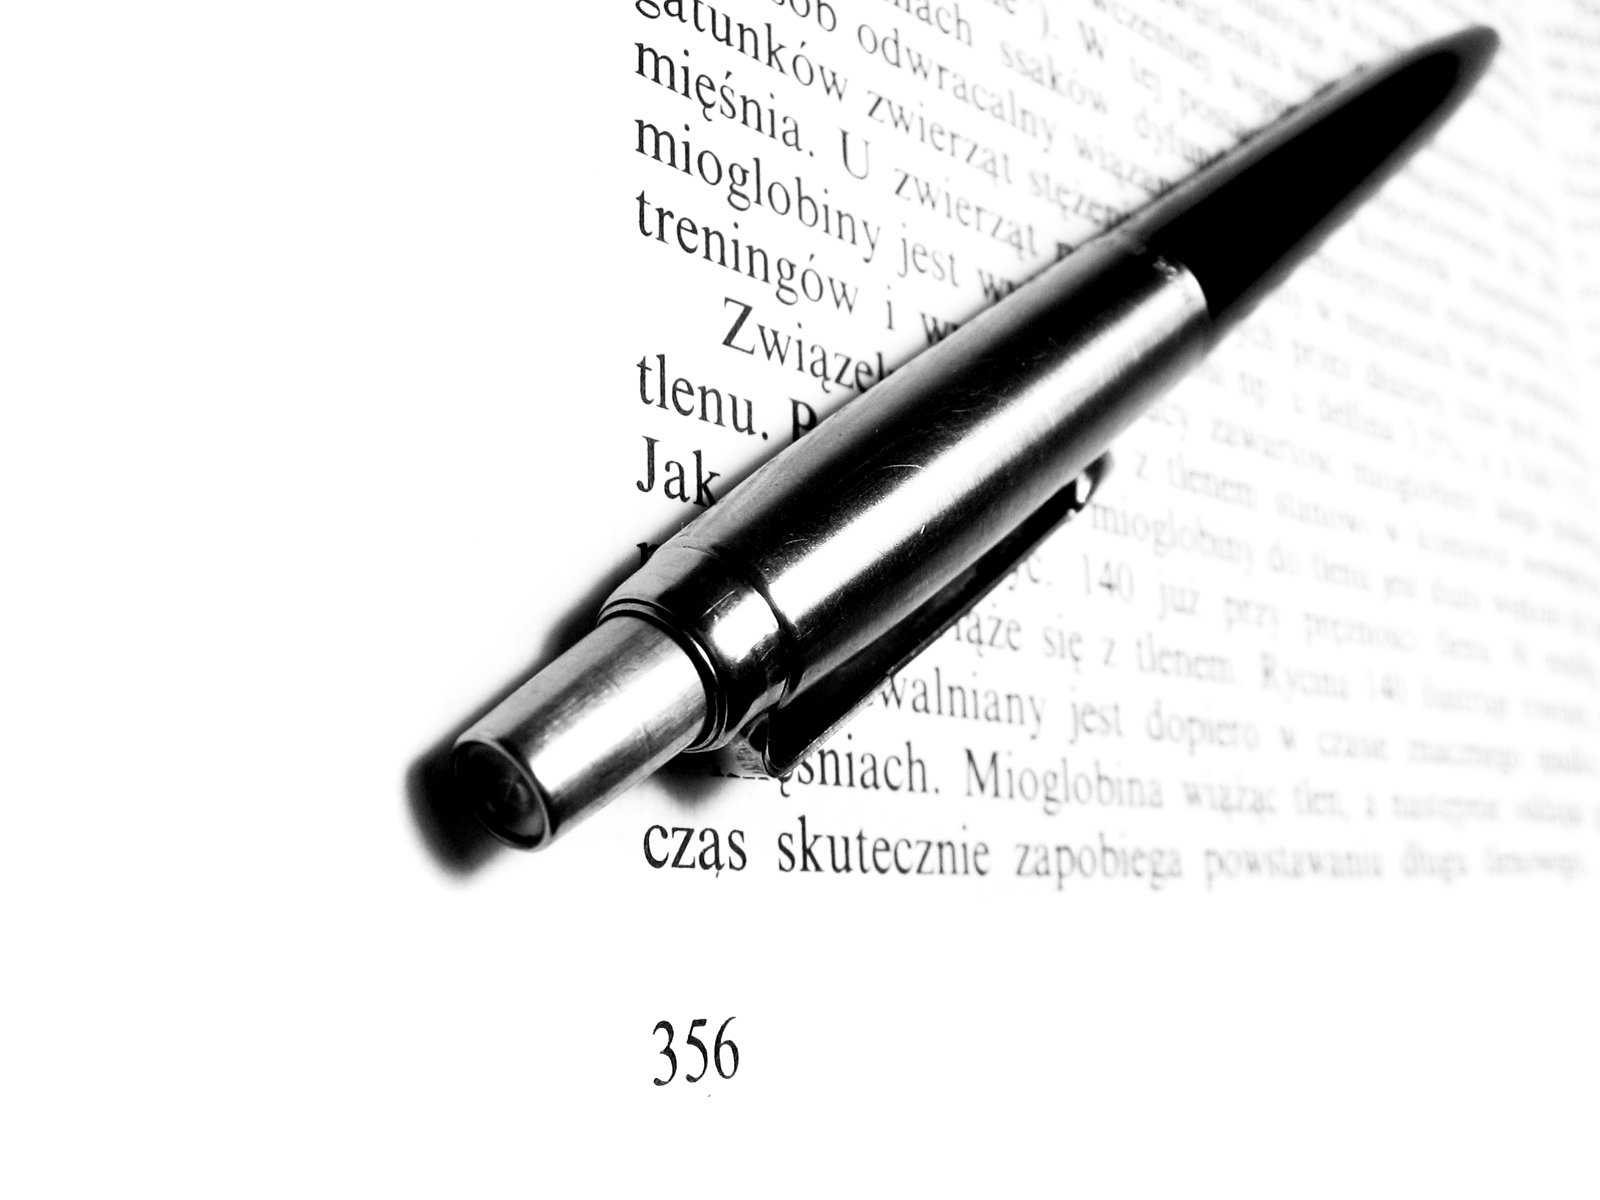 black pen laying on top of a page of a text description